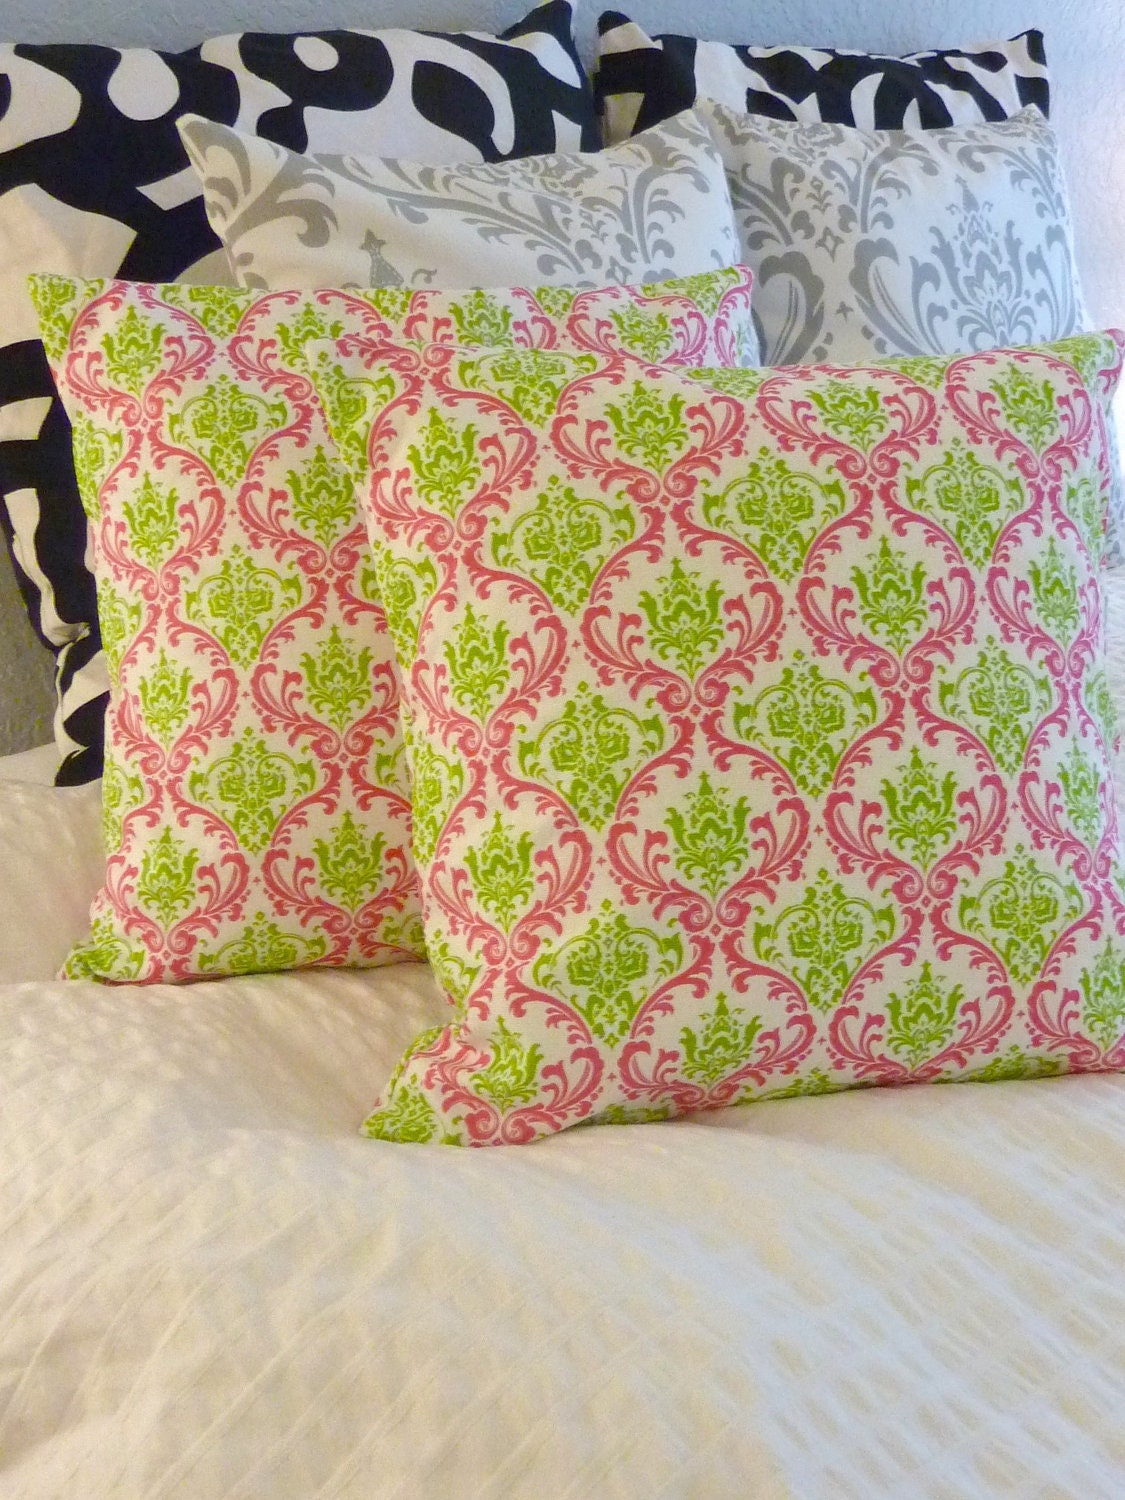 Decorative Pillows Cover- Premier Prints- Madison Candy Pink -  TWO 16x16